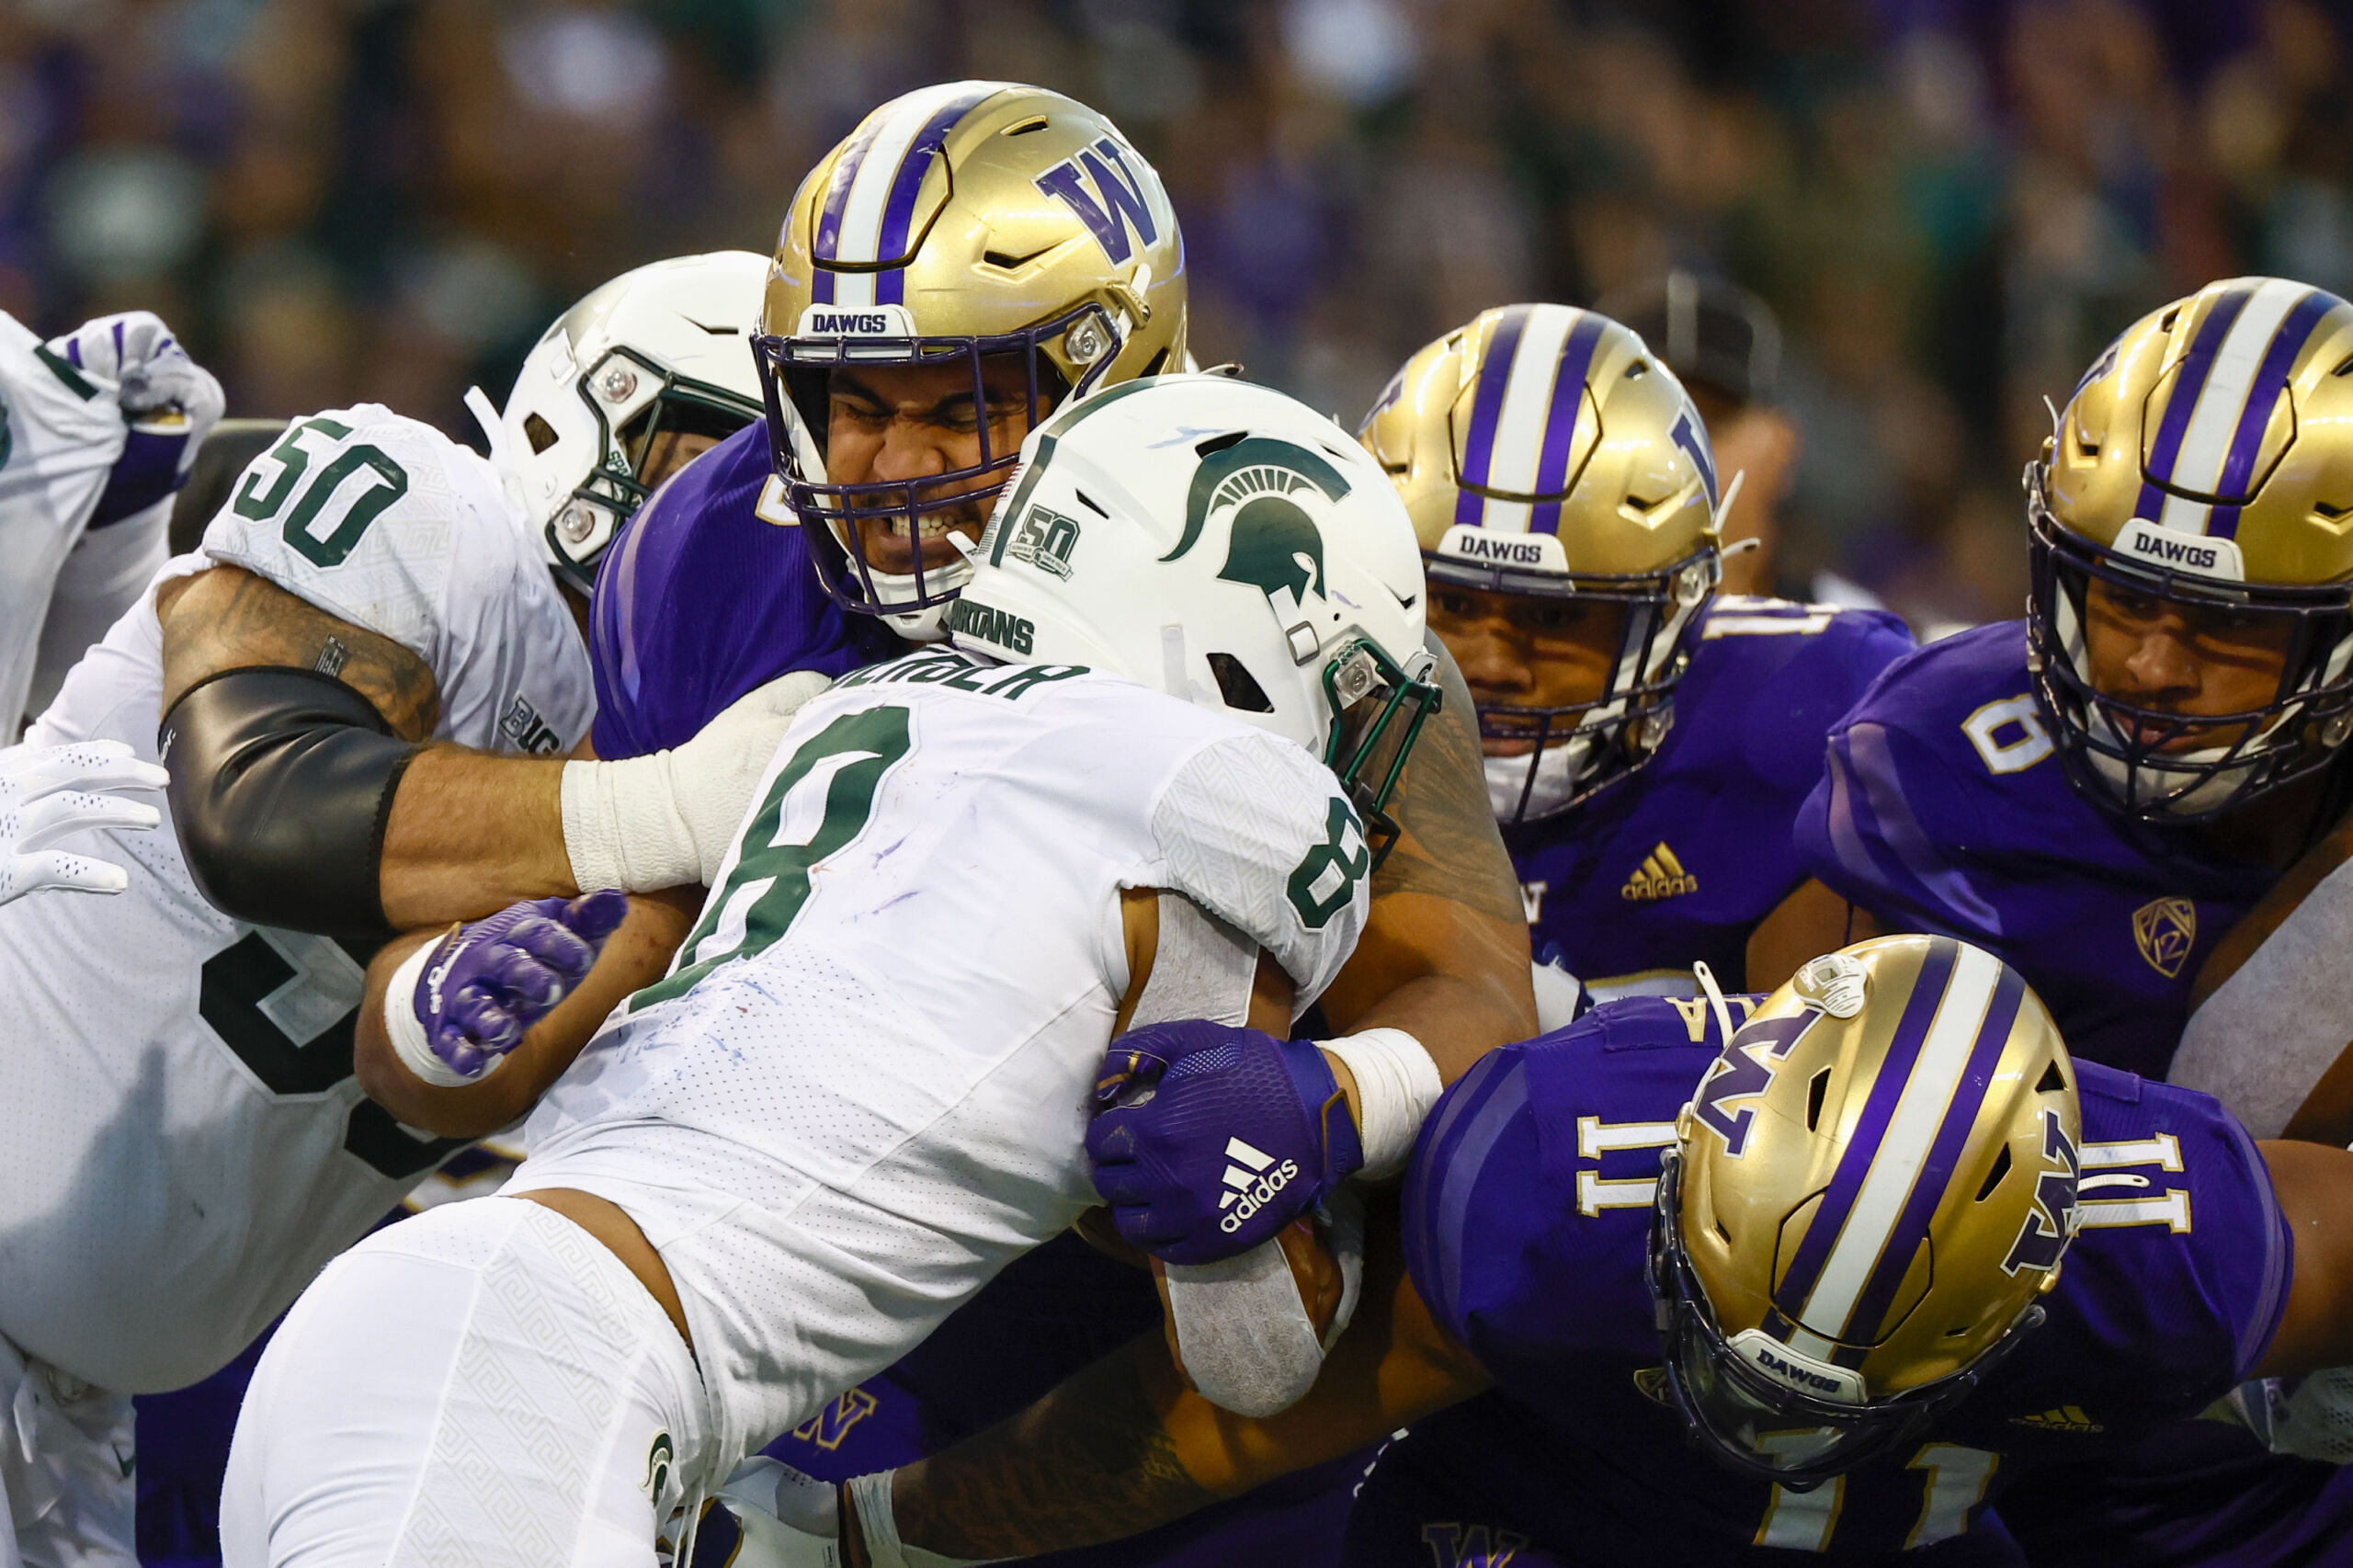 Michigan State football Washington kickoff time, channel is disappointing